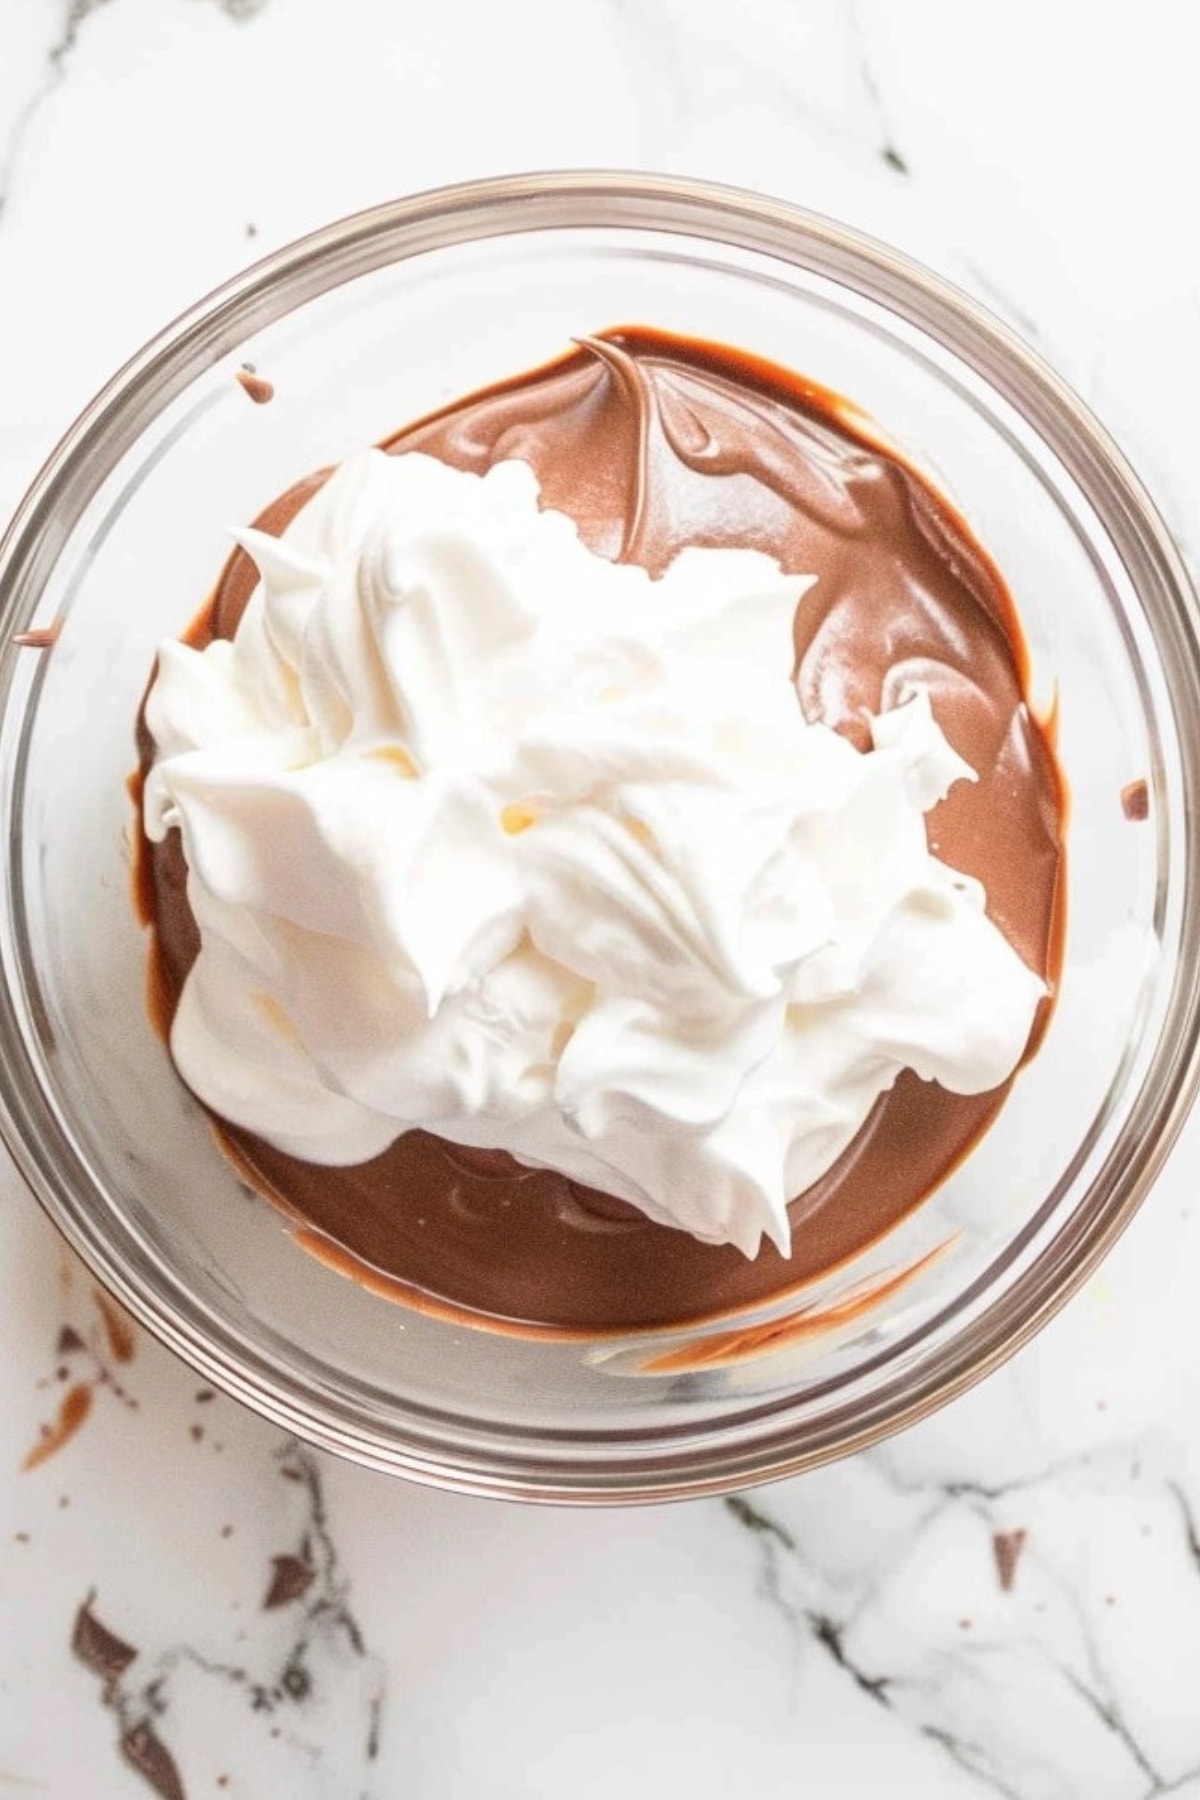 Whipped cream mixed in a bowl of melted chocolate.